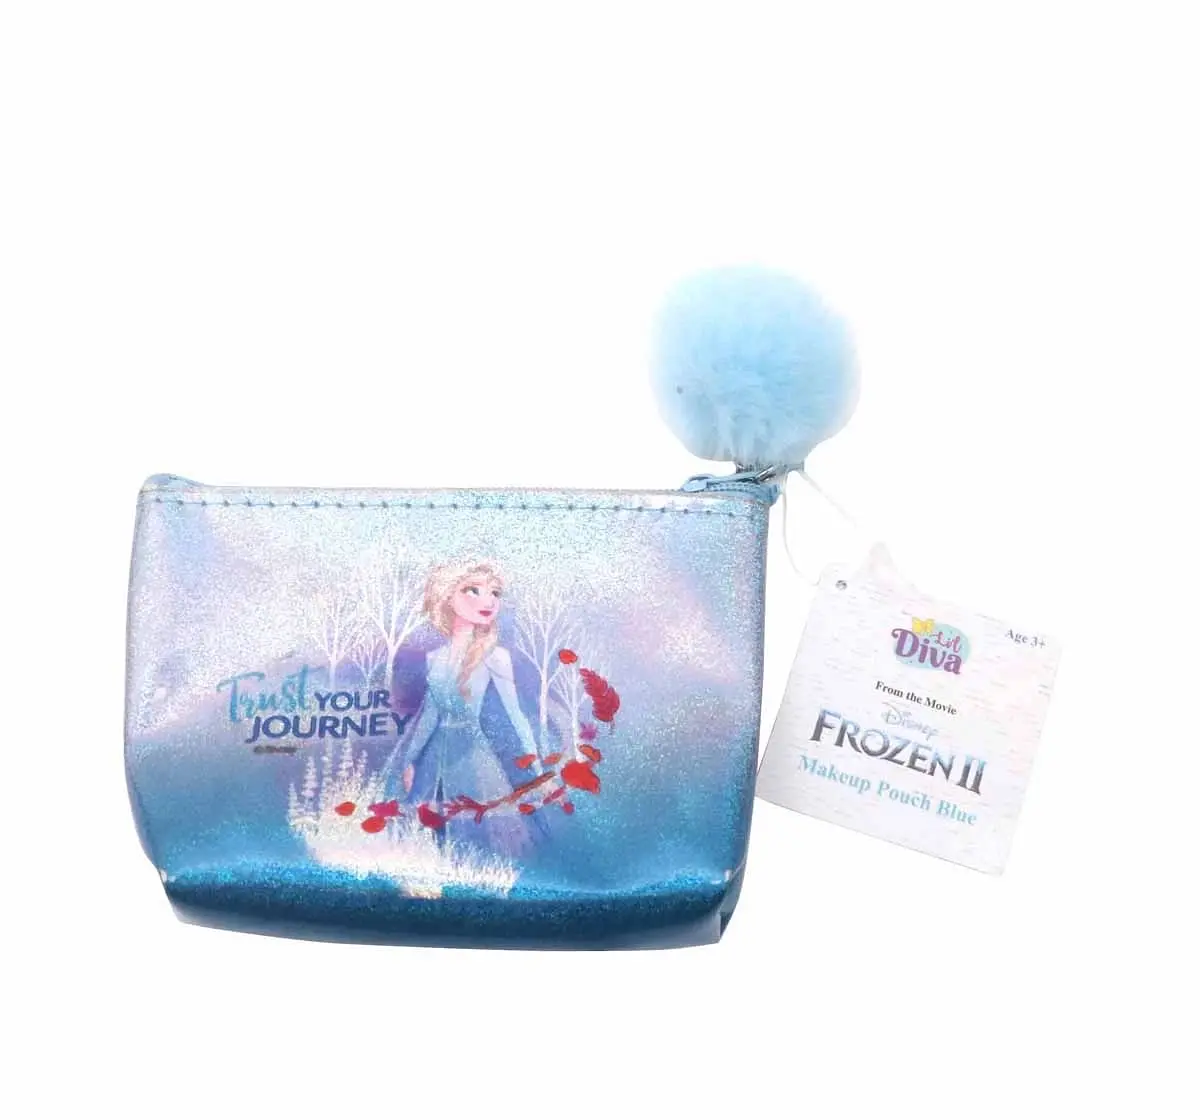 Disney Frozen II Cute Travel Makeup Portable Cosmetic Toiletry Pouch by Li'l Diva For Girls 3 years And Above, Blue